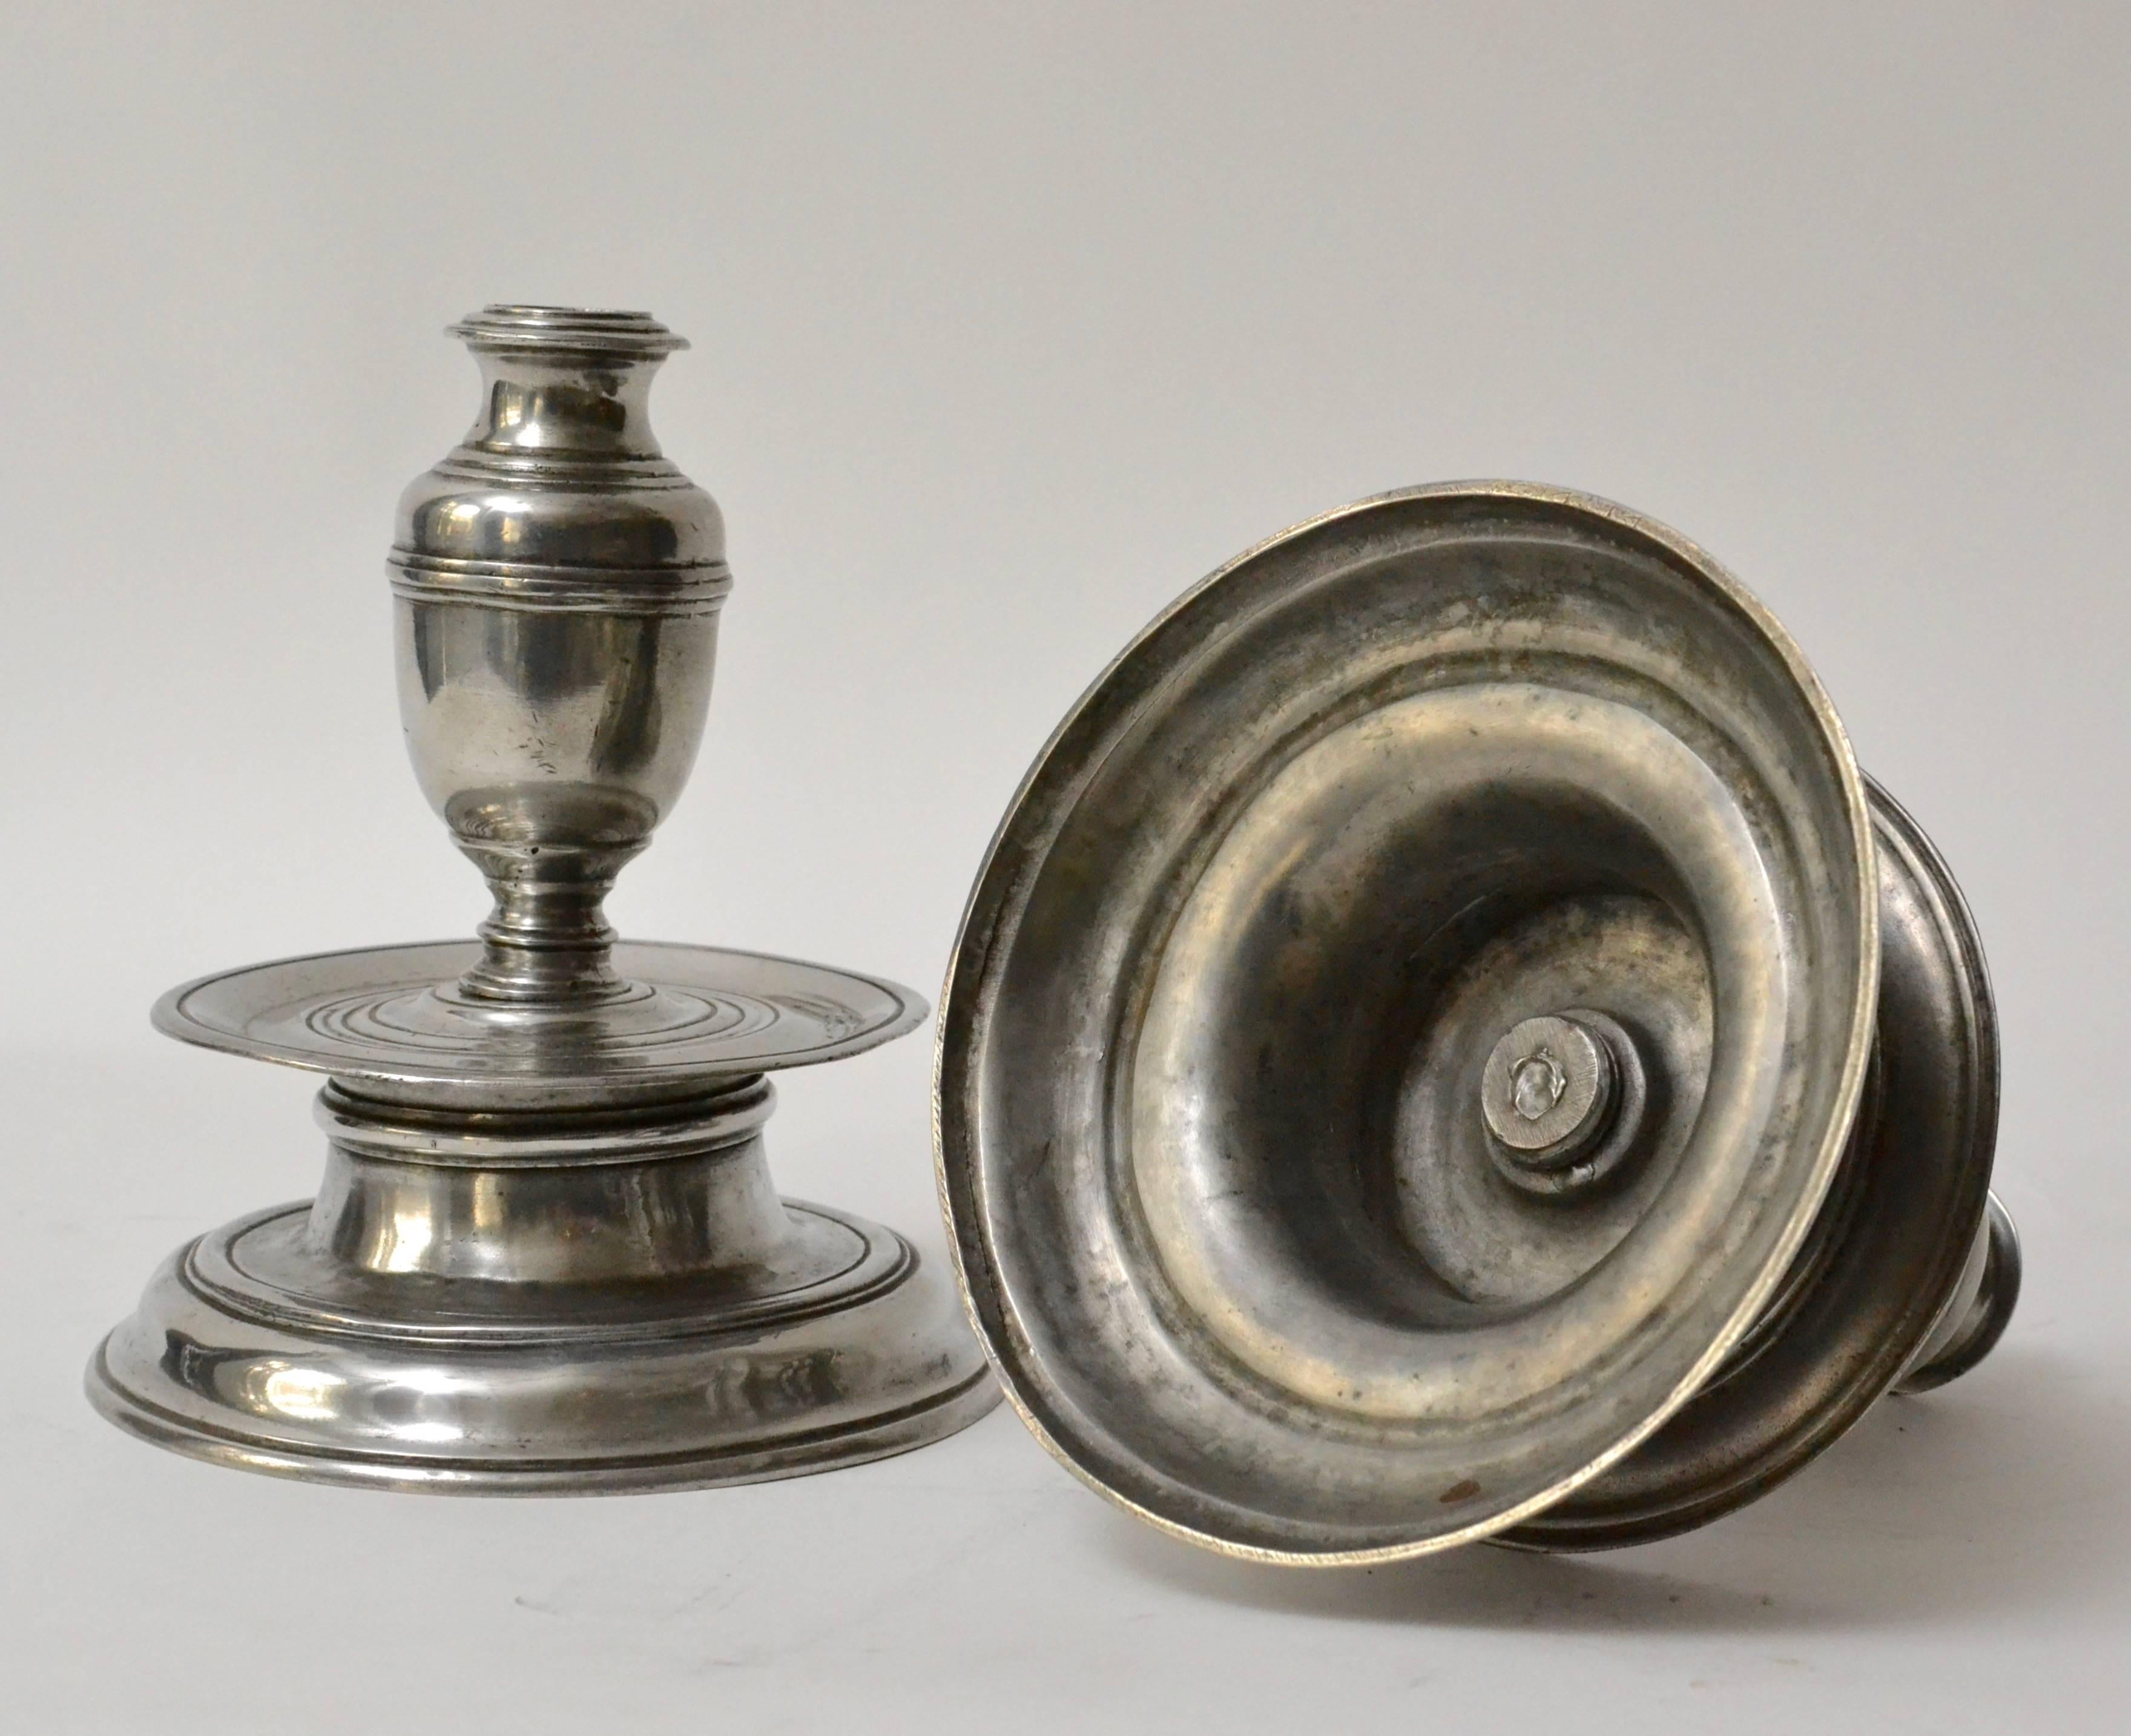 A pair of Baroque pewter candlesticks from early 18th century.